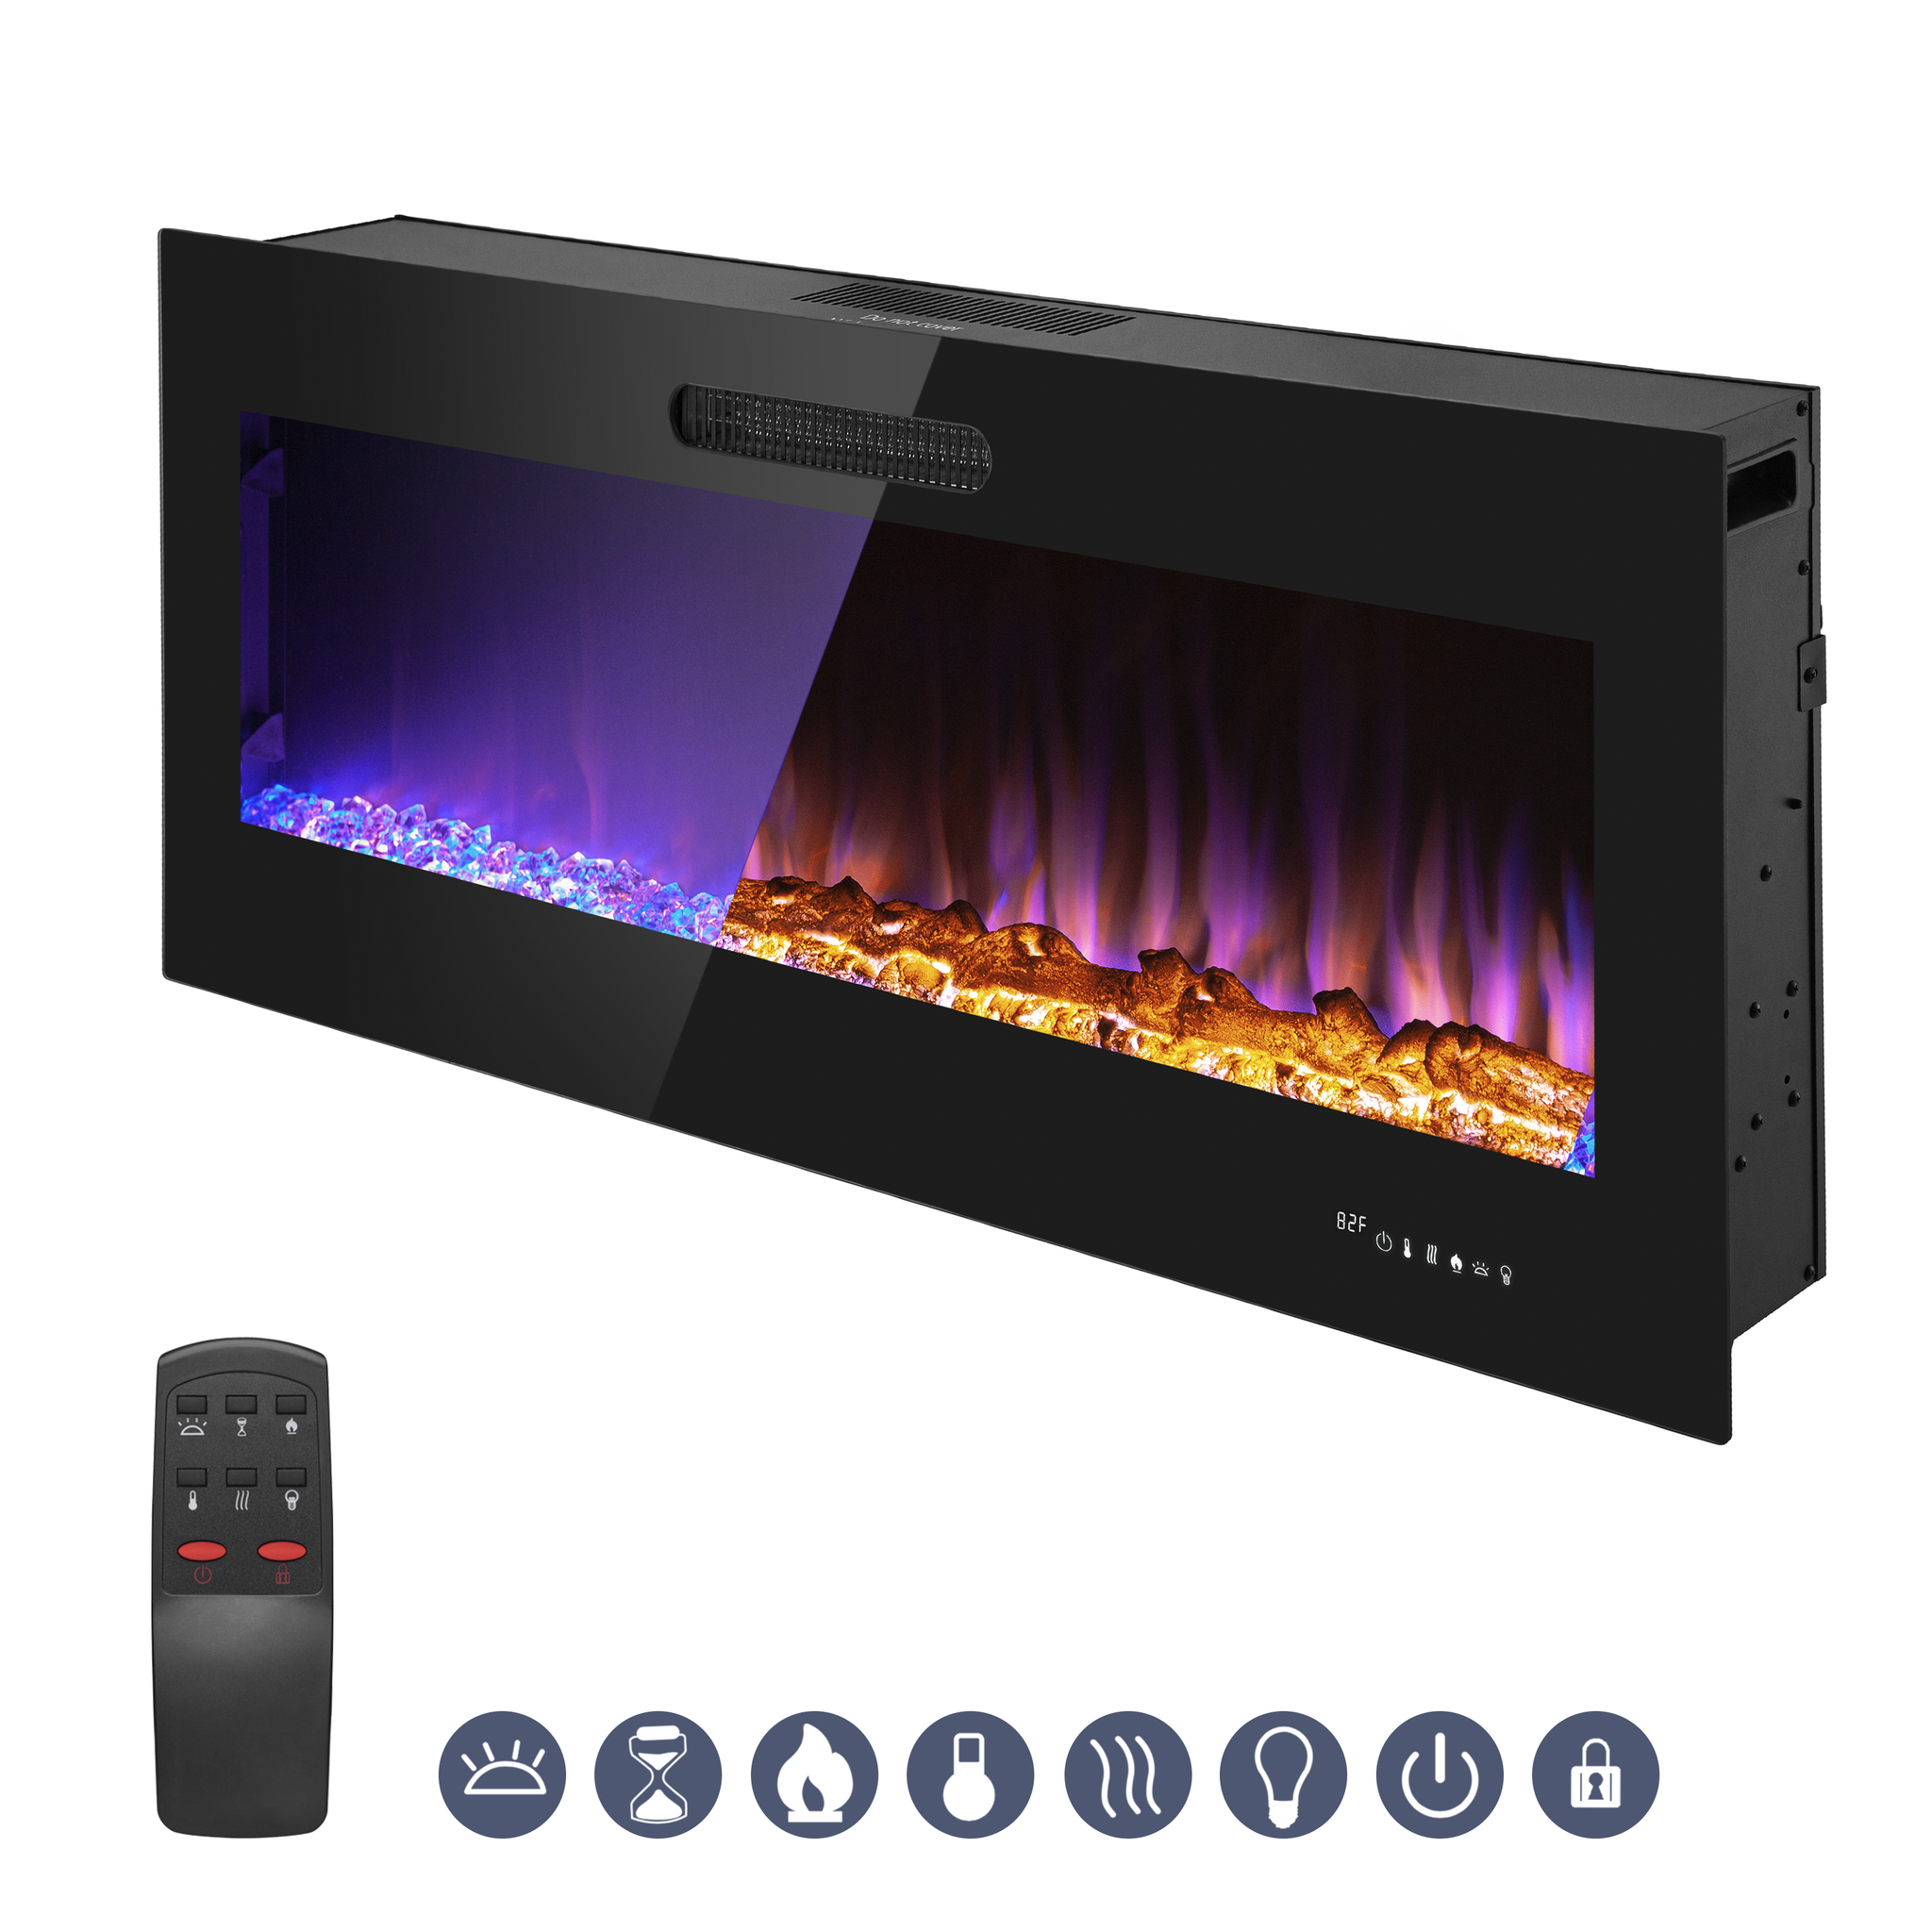 50 Inch LED Slim Design Electric Fireplace Insert and Wall Mounted Fireplace with 1500 Watt Heater, Log & Crystal Ember Options, Adjustable Realistic Flame and Remote Control by Prominence Home